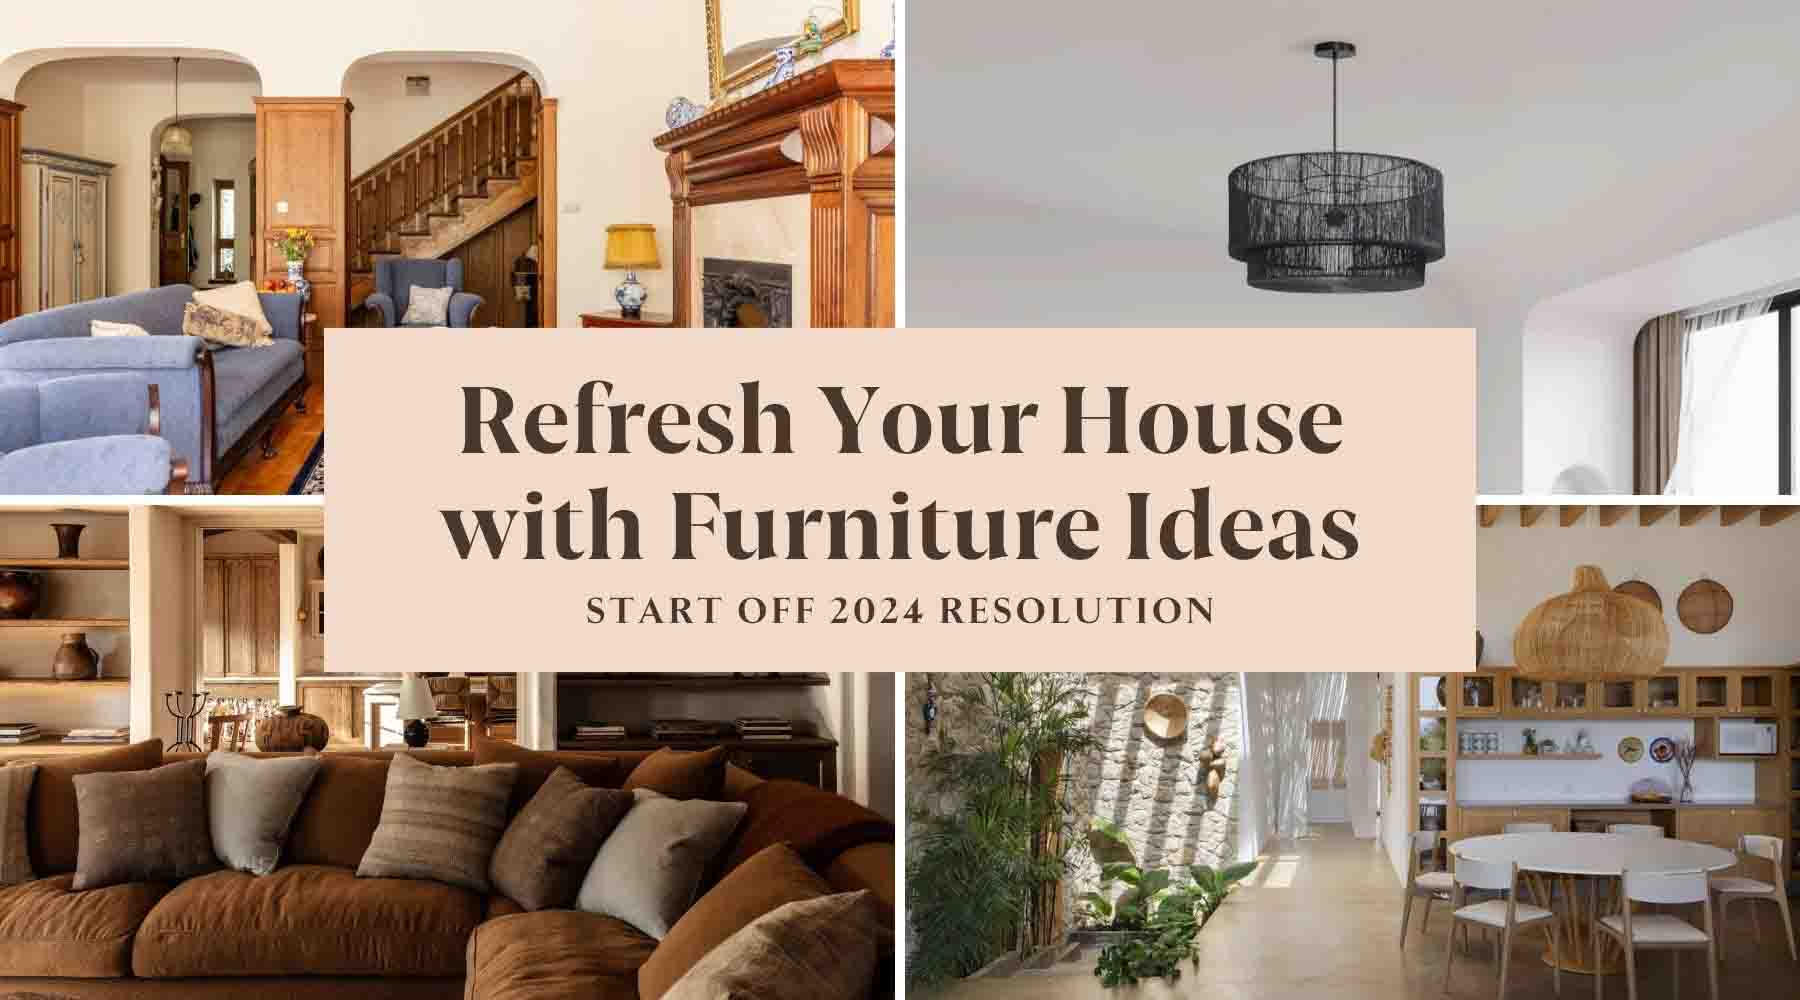 Start off 2024: Refresh Your House with Furniture Ideas!